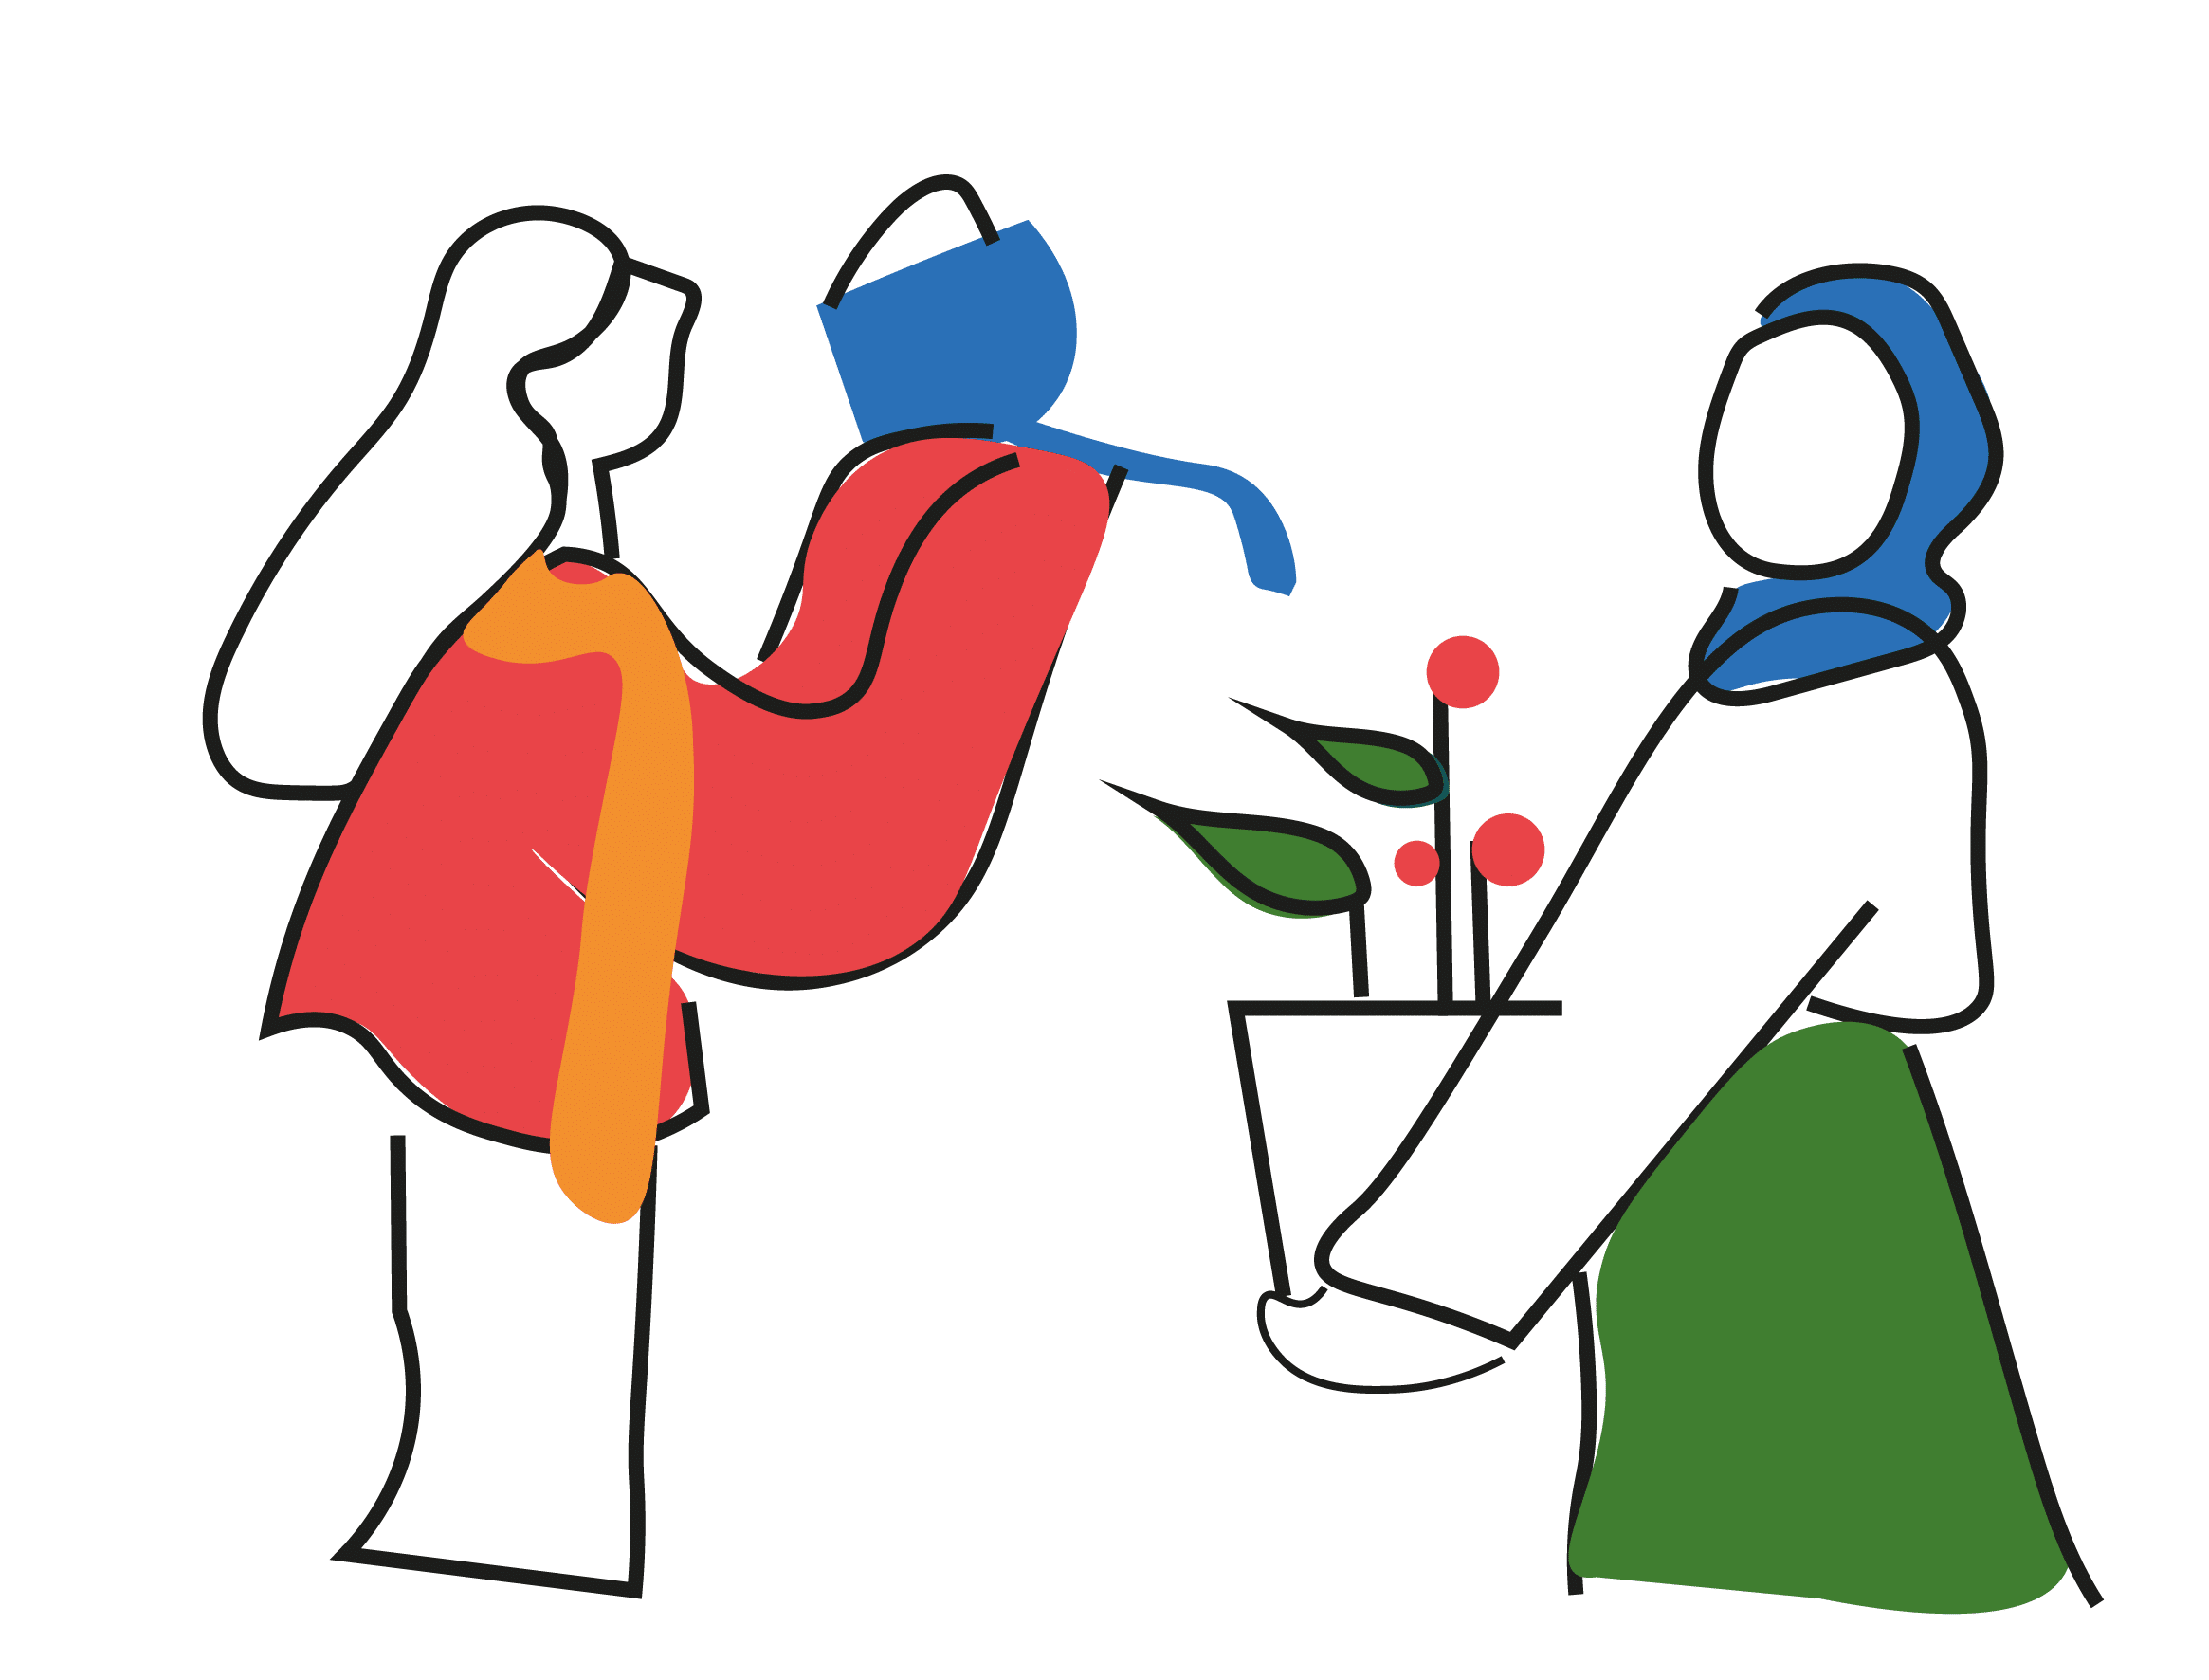 An illustration of a woman pouring water over a plant that another woman is holding